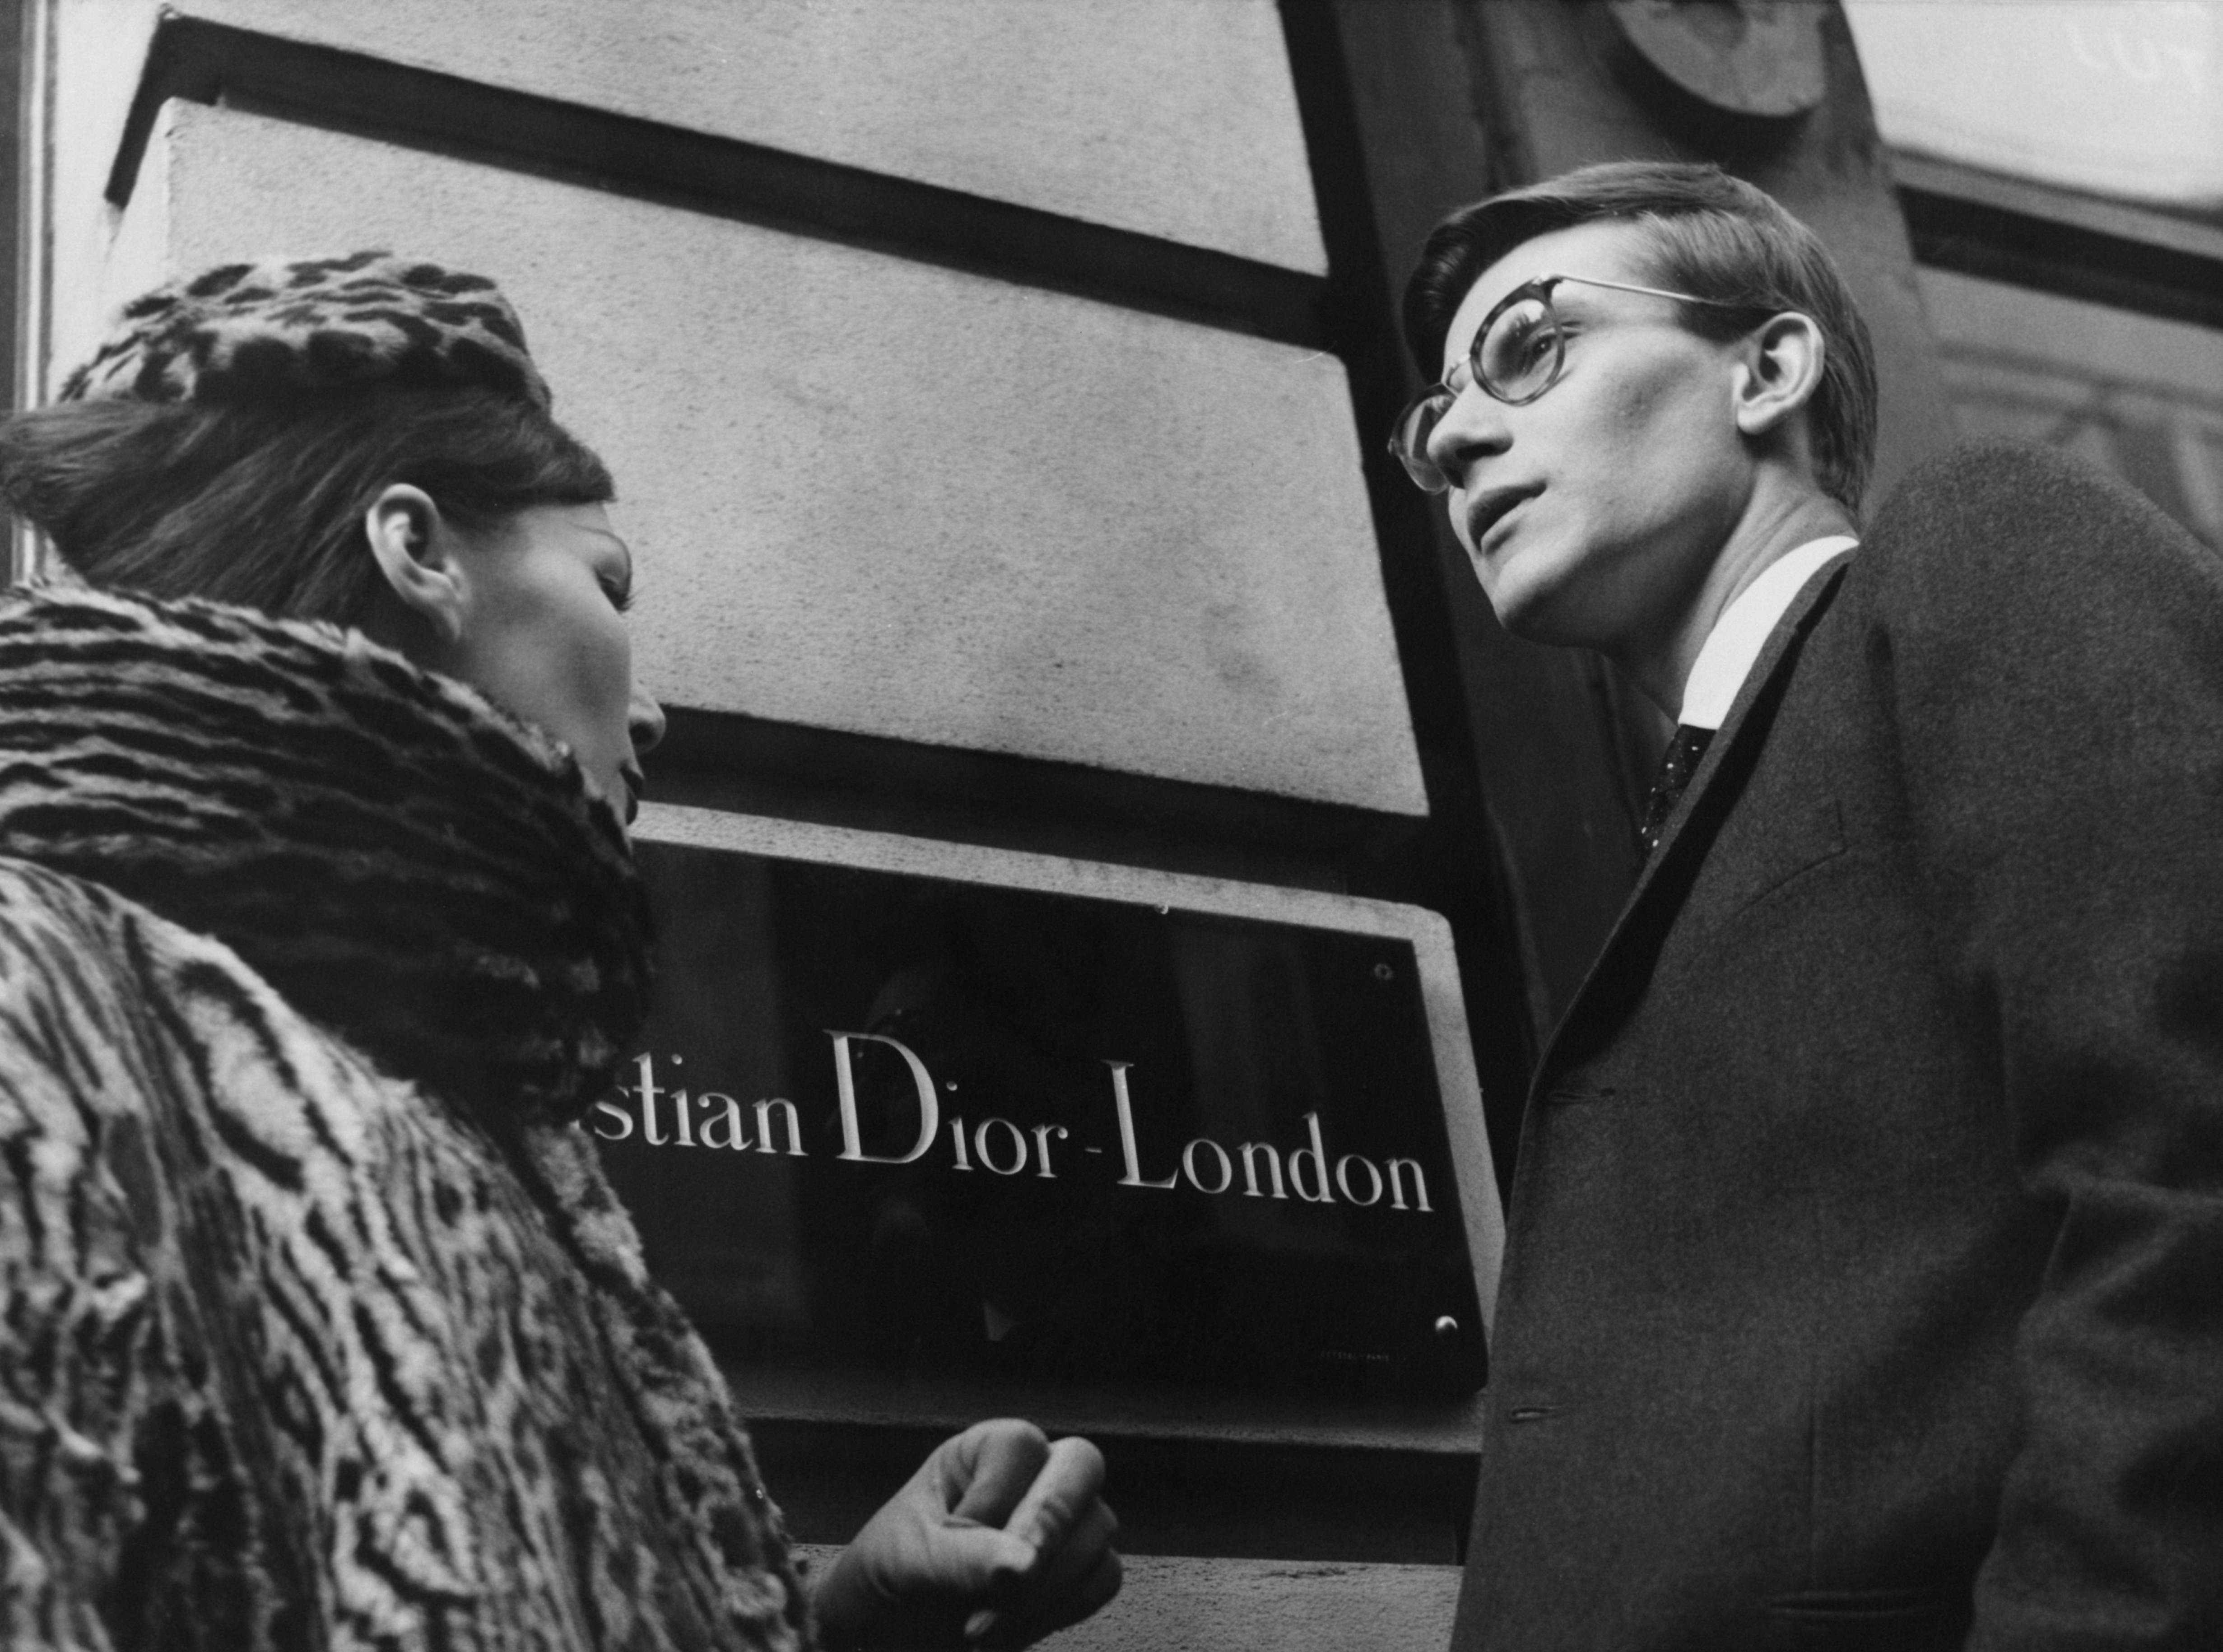 French fashion designer Yves Saint Laurent (1936 - 2008) in London, 11th November 1958. He is preparing for the following day's Dior Autumn collection show to an audience including Princess Margaret, at Blenheim Palace. (Photo by Popperfoto/Getty Images)